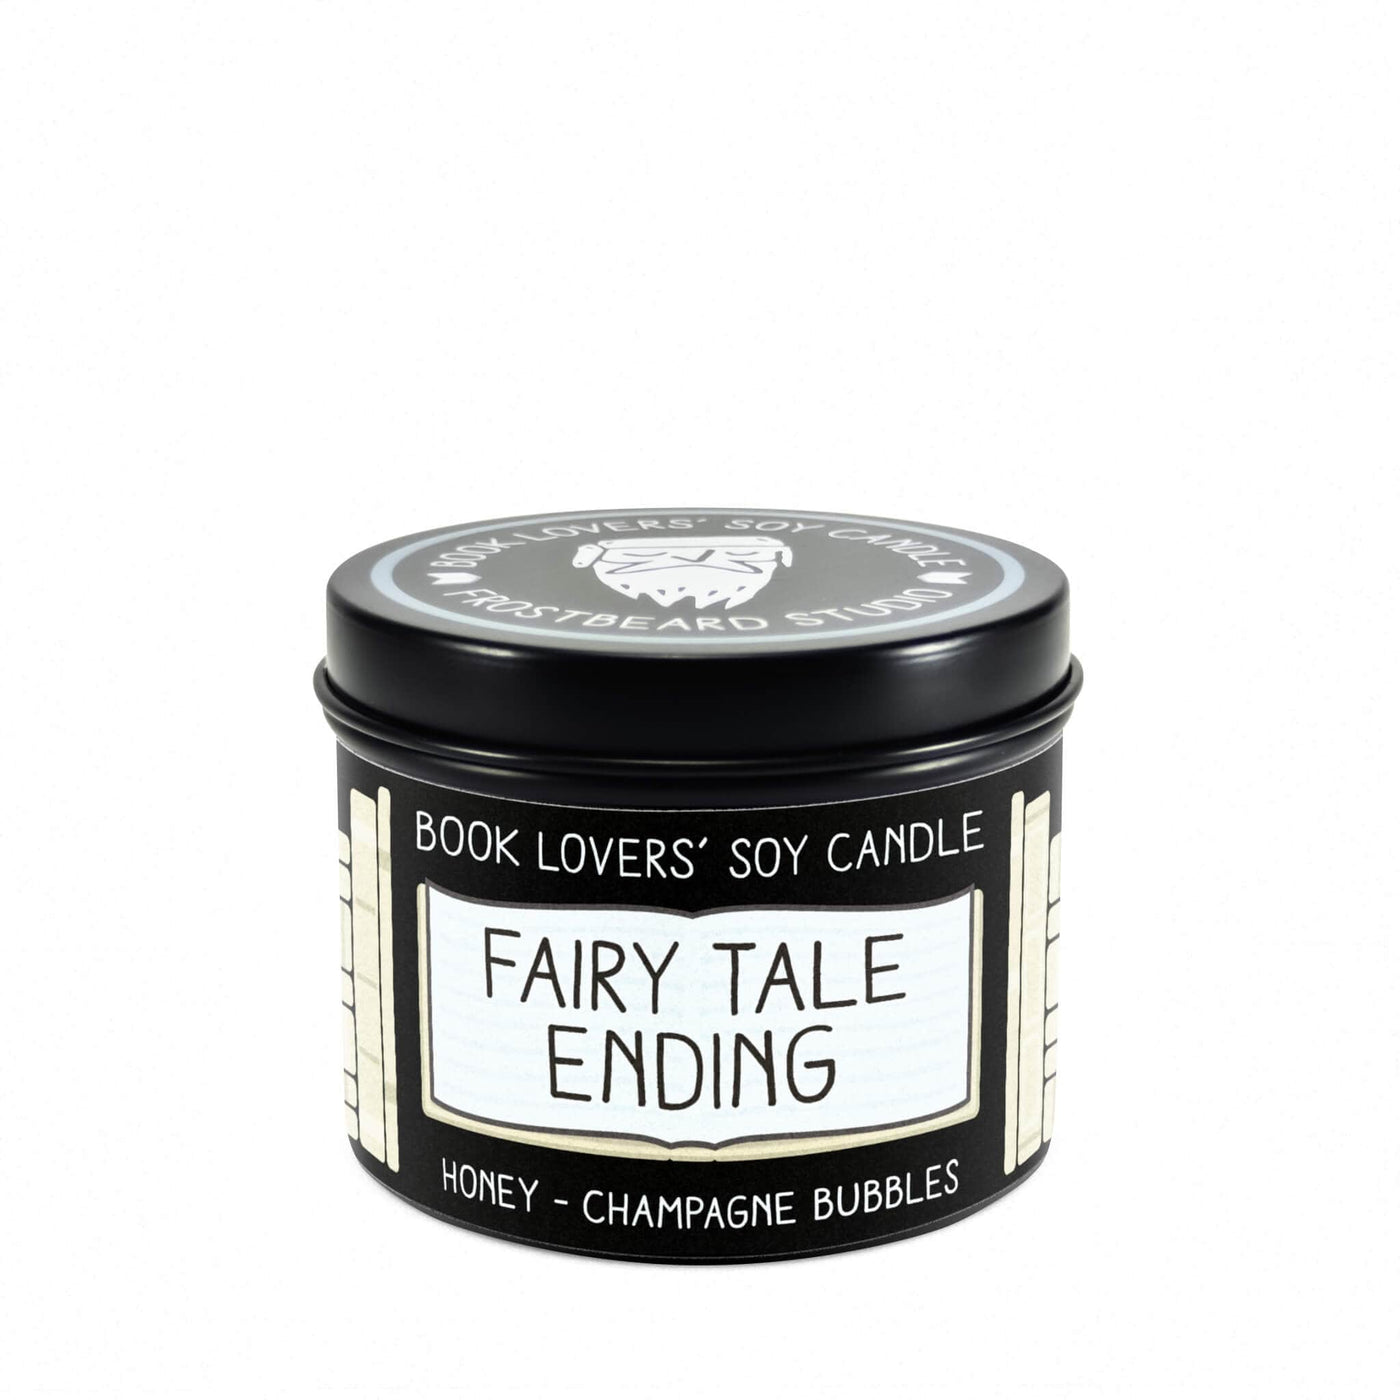 Fairy Tale Ending  -  4 oz Tin  -  Book Lovers' Soy Candle  -  Frostbeard Studio